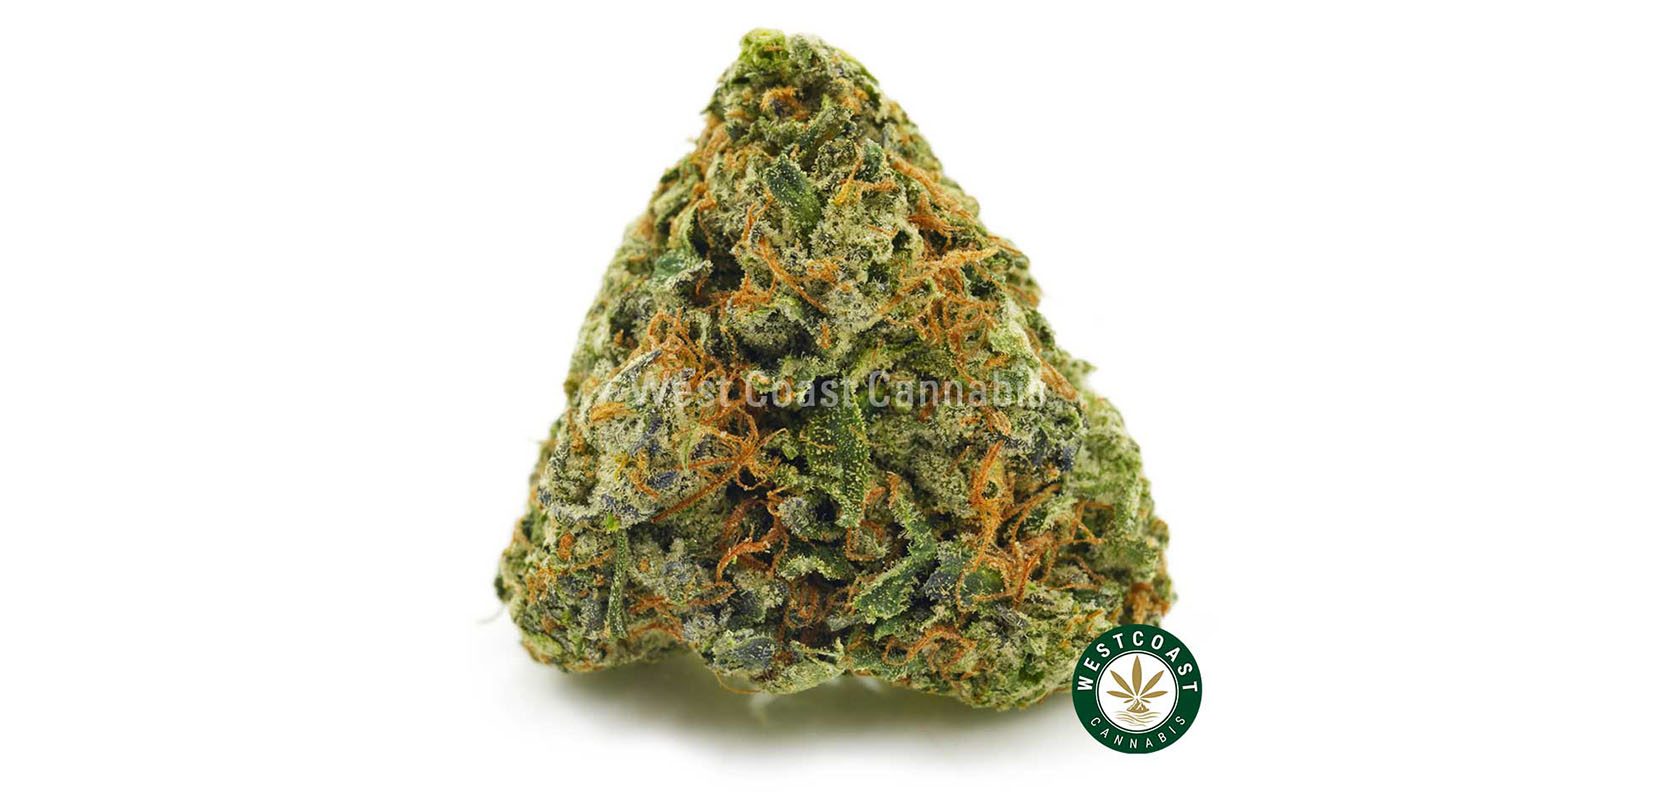 chemdawg weed strain nugget. buy weed online in canada. best indica strains online dispensary.